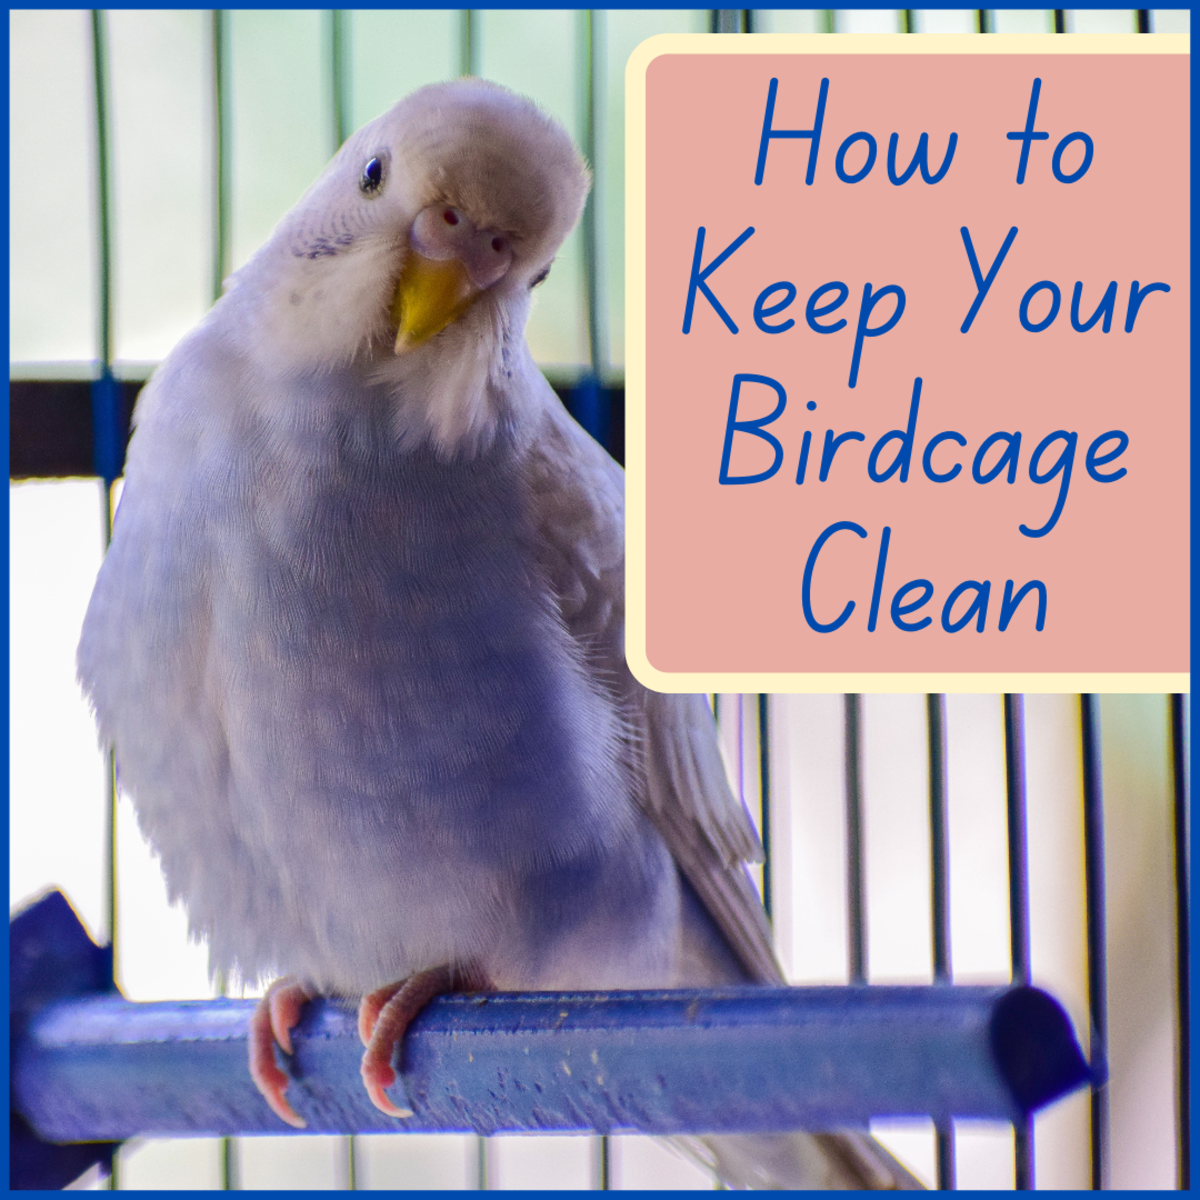 Easy Hacks to Help Mess-Proof Your Bird Cage!